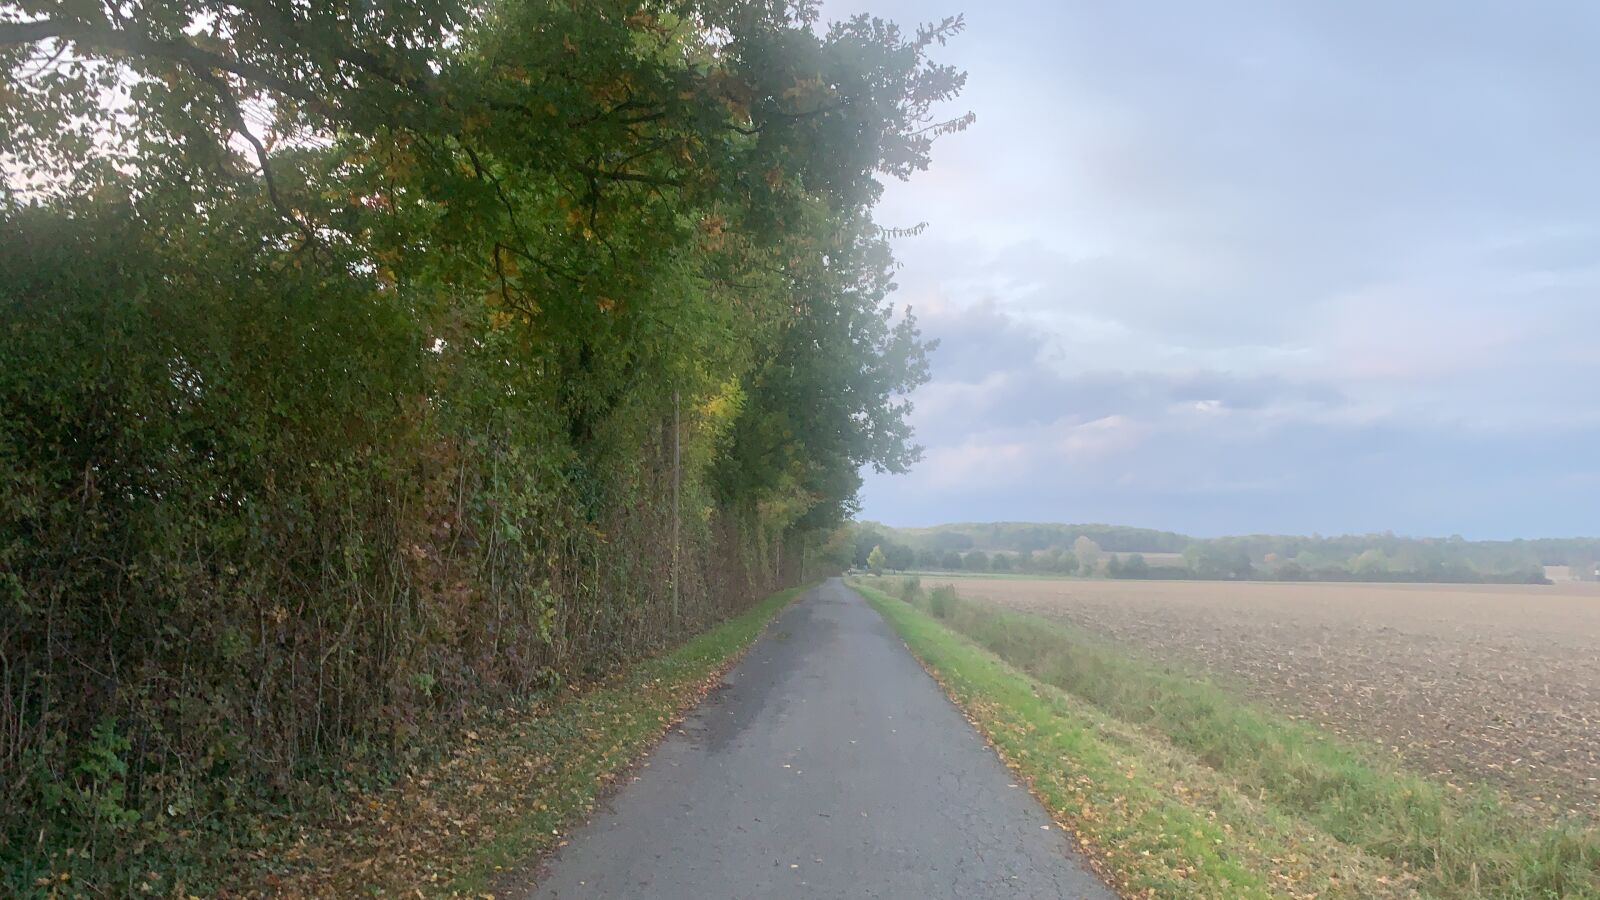 Apple iPhone XS Max + iPhone XS Max back camera 4.25mm f/1.8 sample photo. Road, germany, tree photography